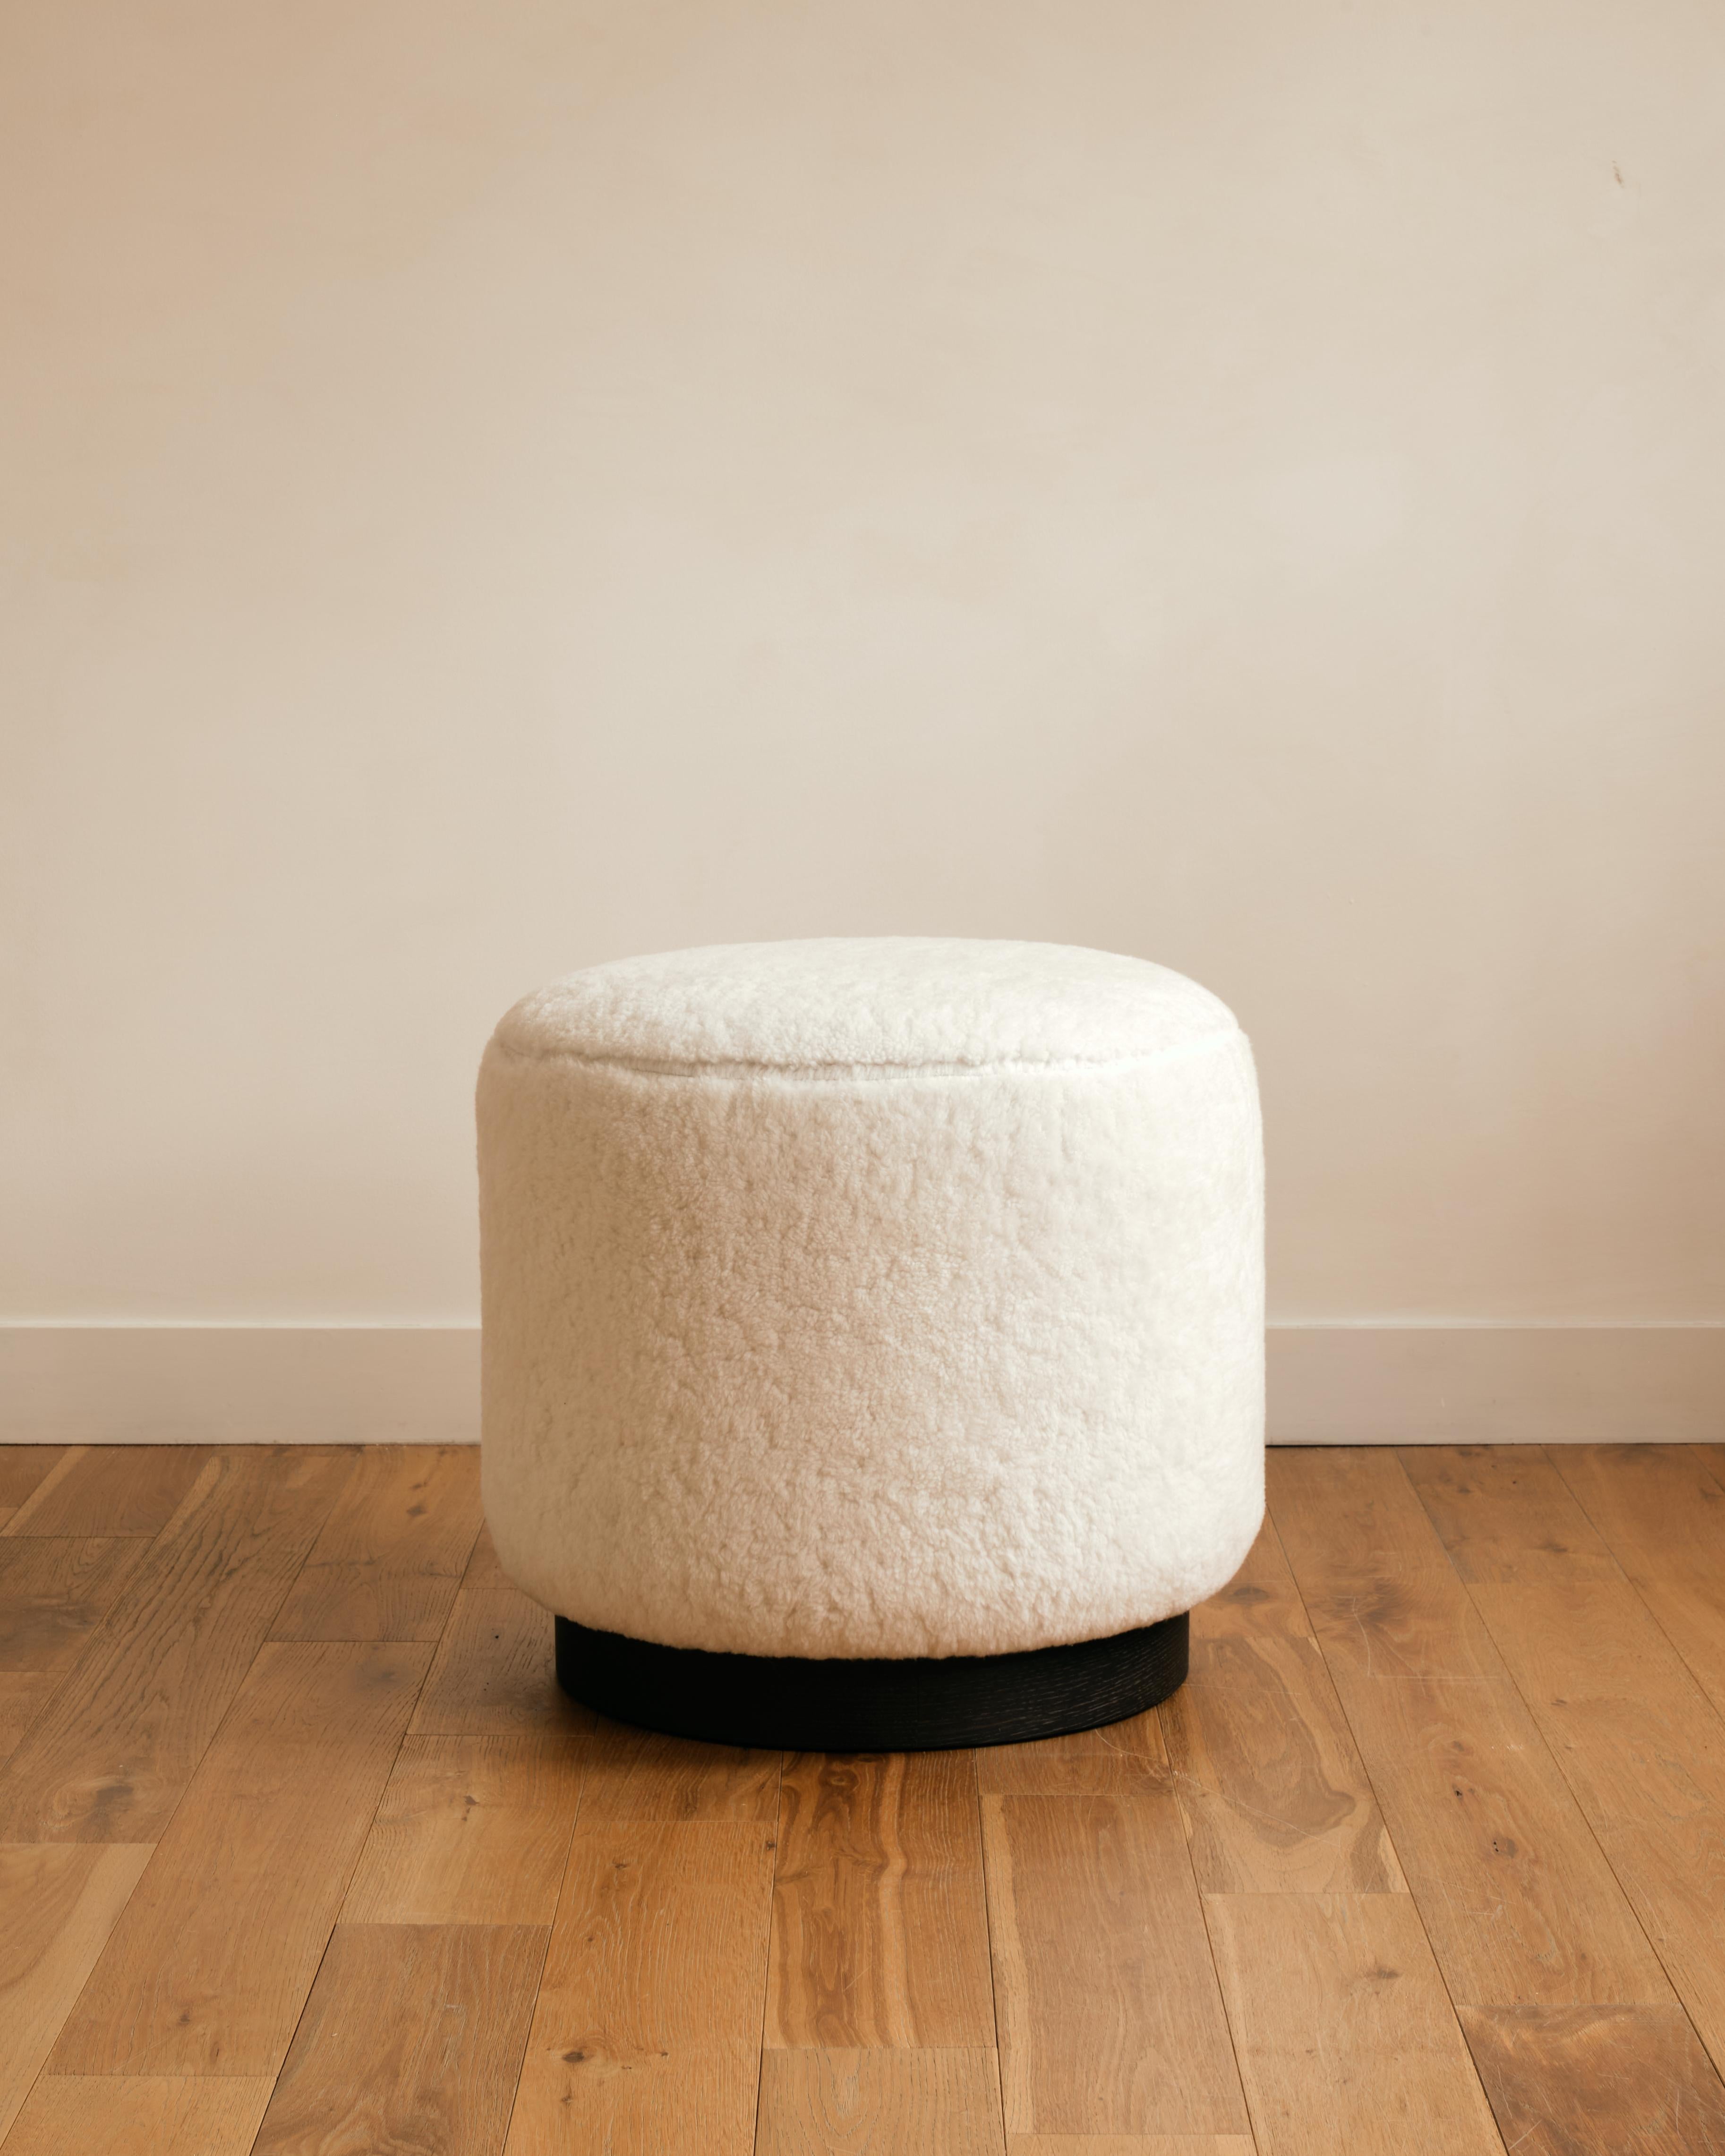 The Sorrento ottoman by Studio Sam London is the softest and most comfortable pouf you will ever try.
All our pieces are made from a range of available materials which we select depending on size and availability in order to keep the production